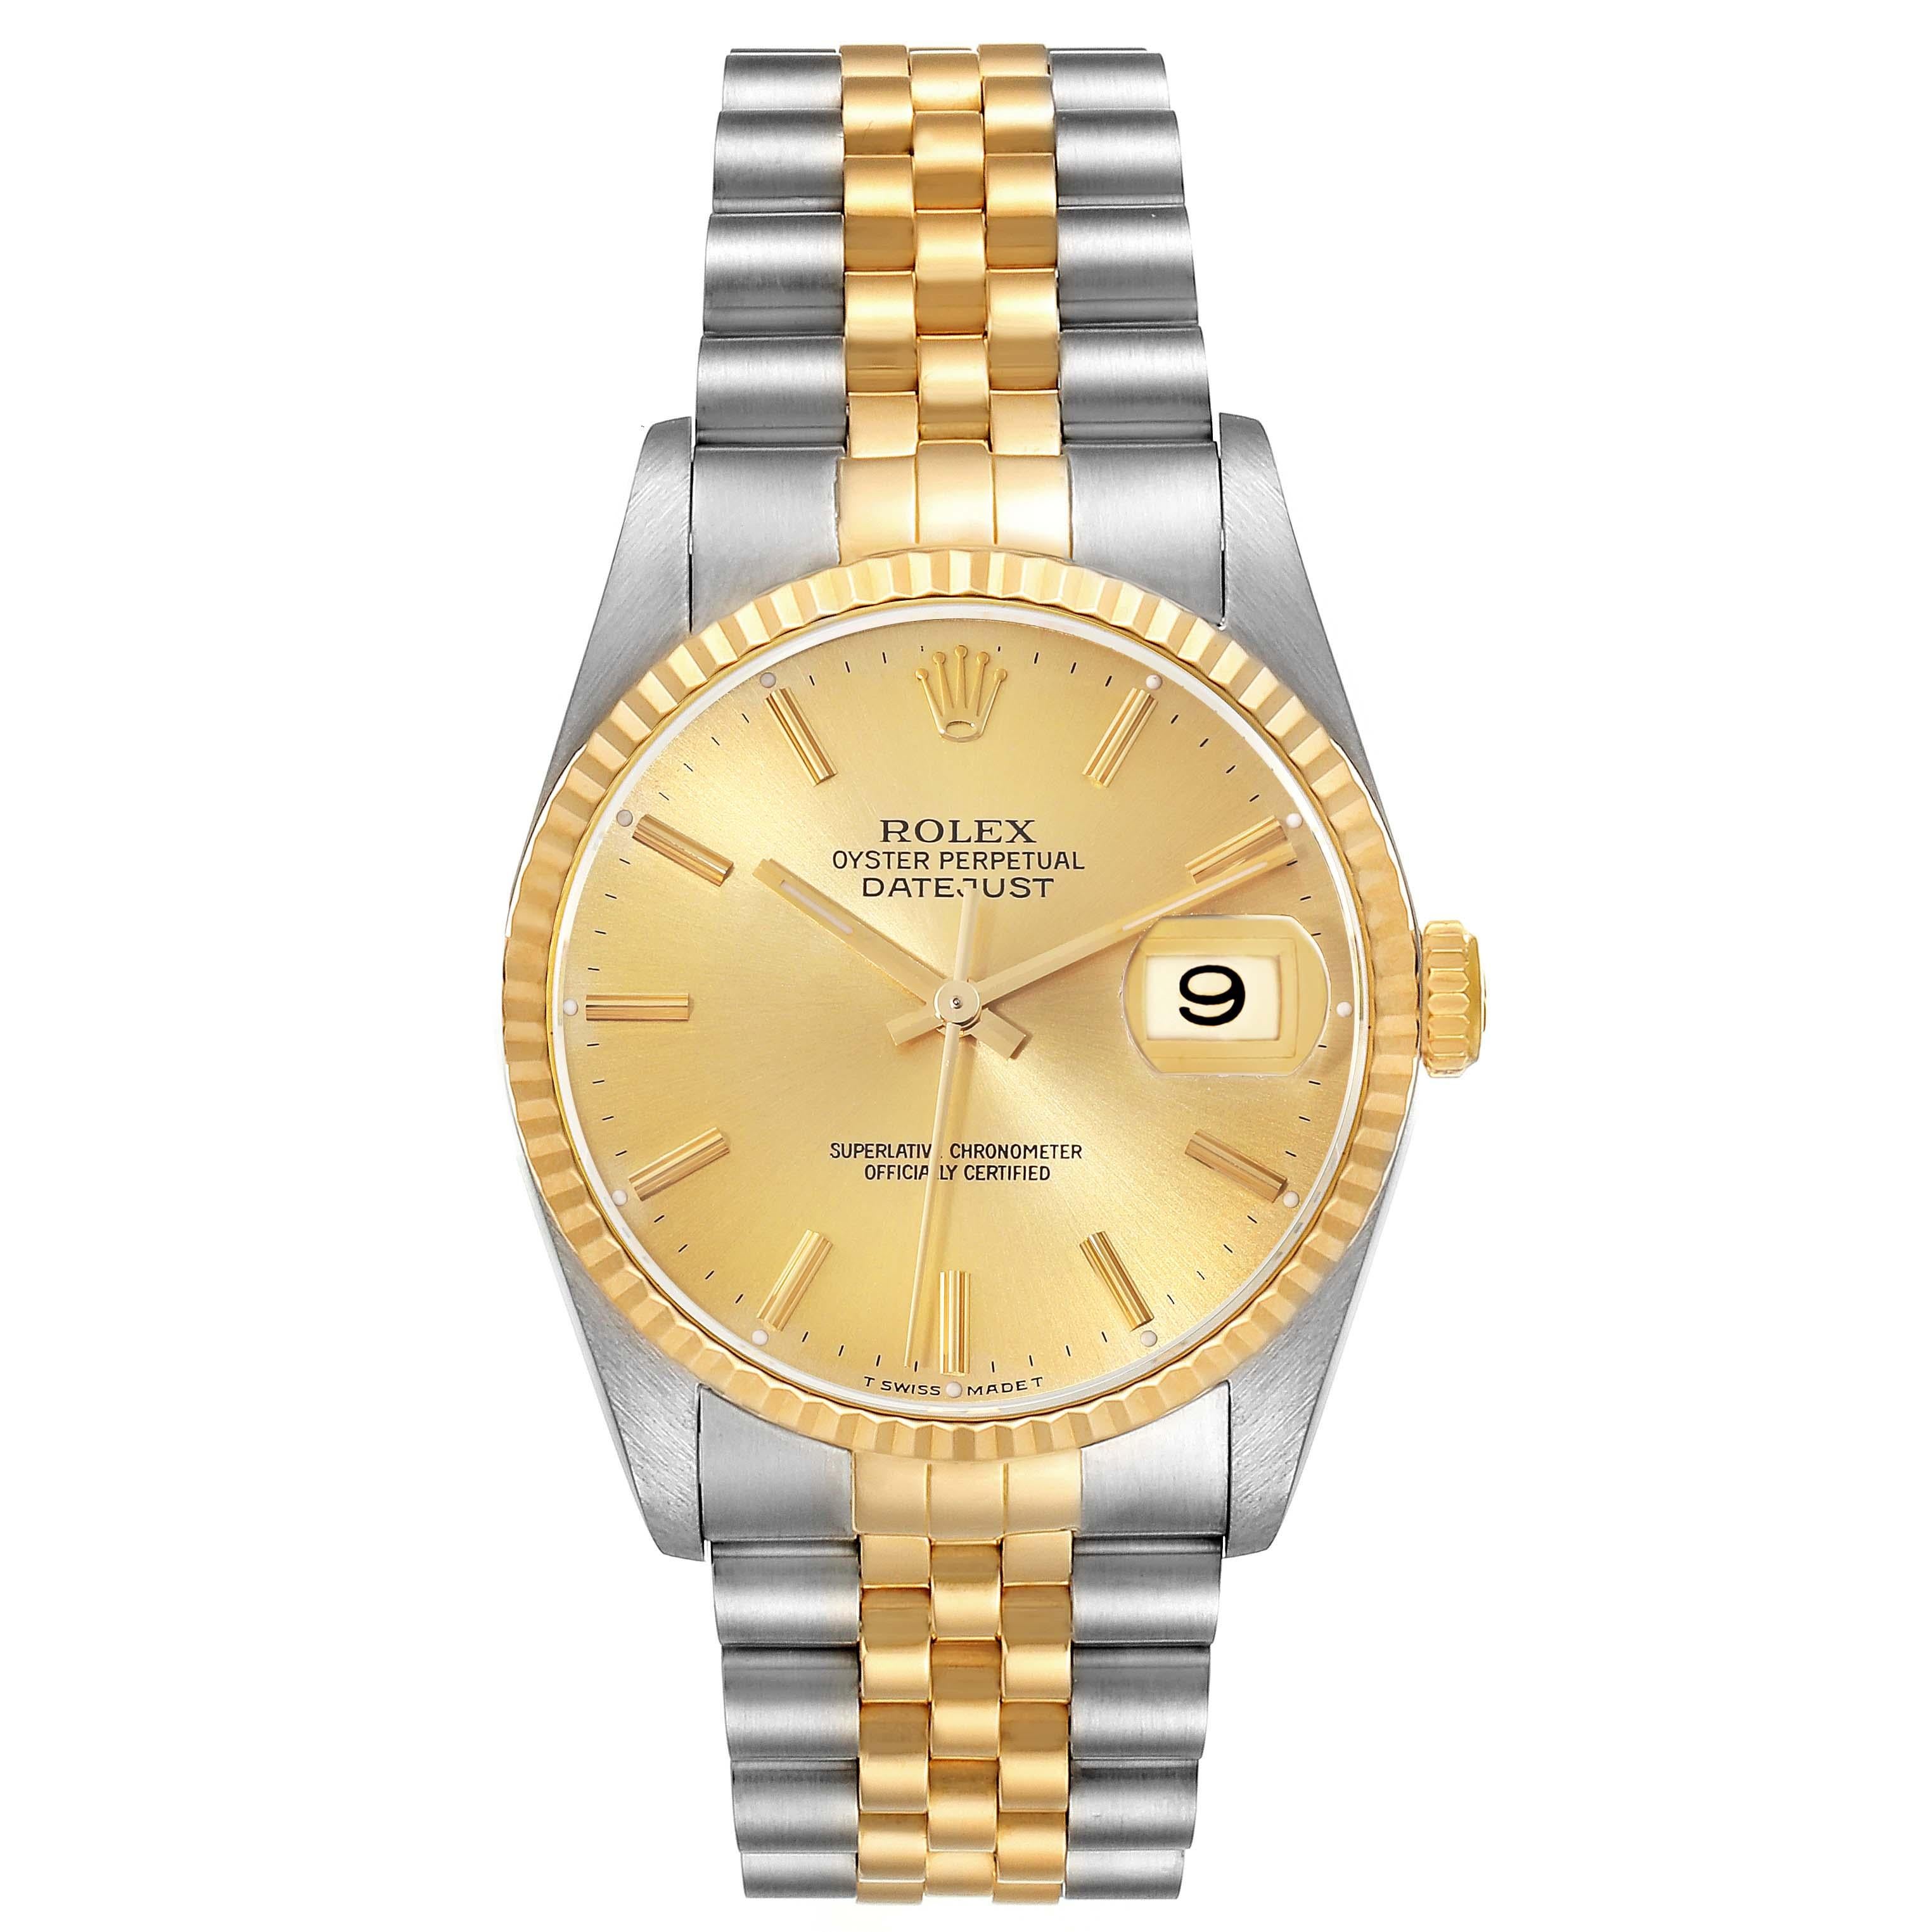 Rolex Datejust 36 Steel Yellow Gold Champagne Dial Mens Watch 16233 For Sale 2